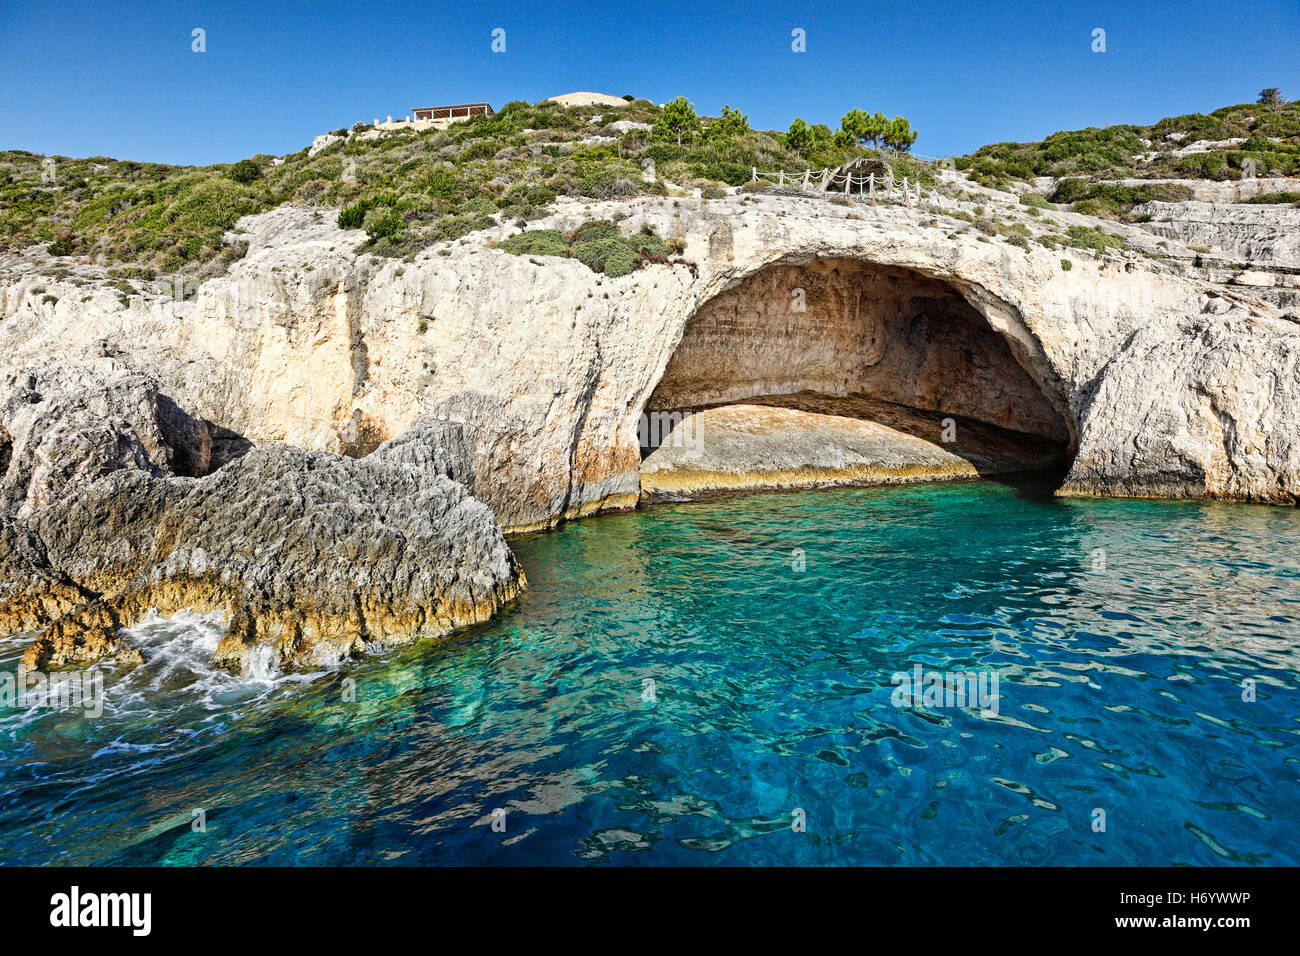 The famous Blue Caves in Zakynthos island, Greece Stock Photo